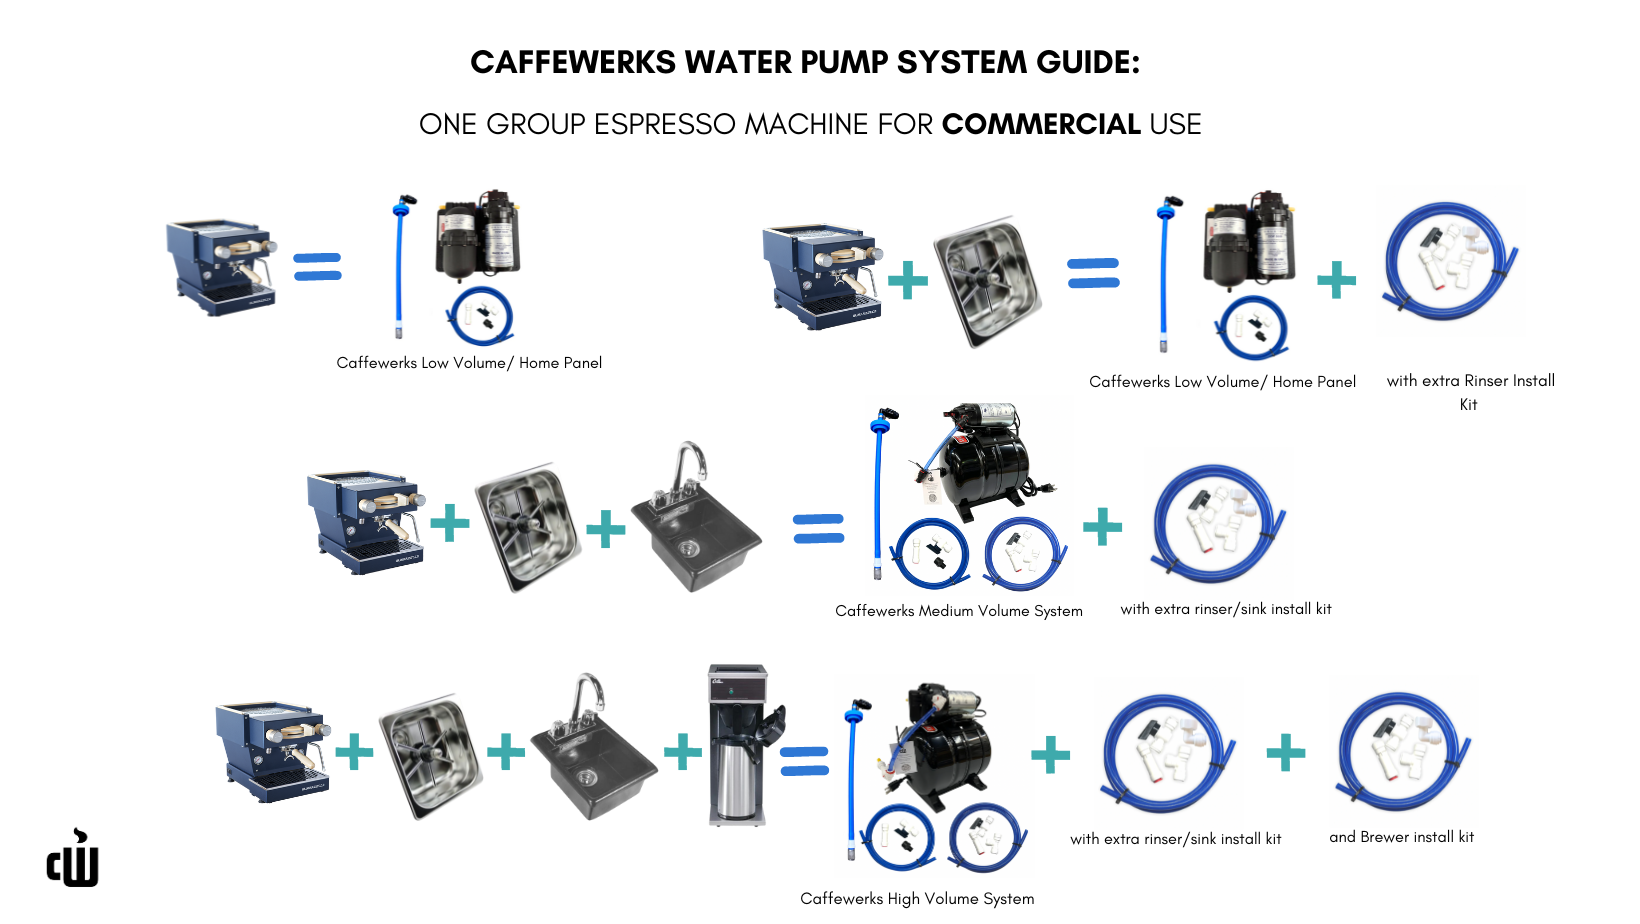 Caffewerks Water Pump System Guide></div>
<div style=